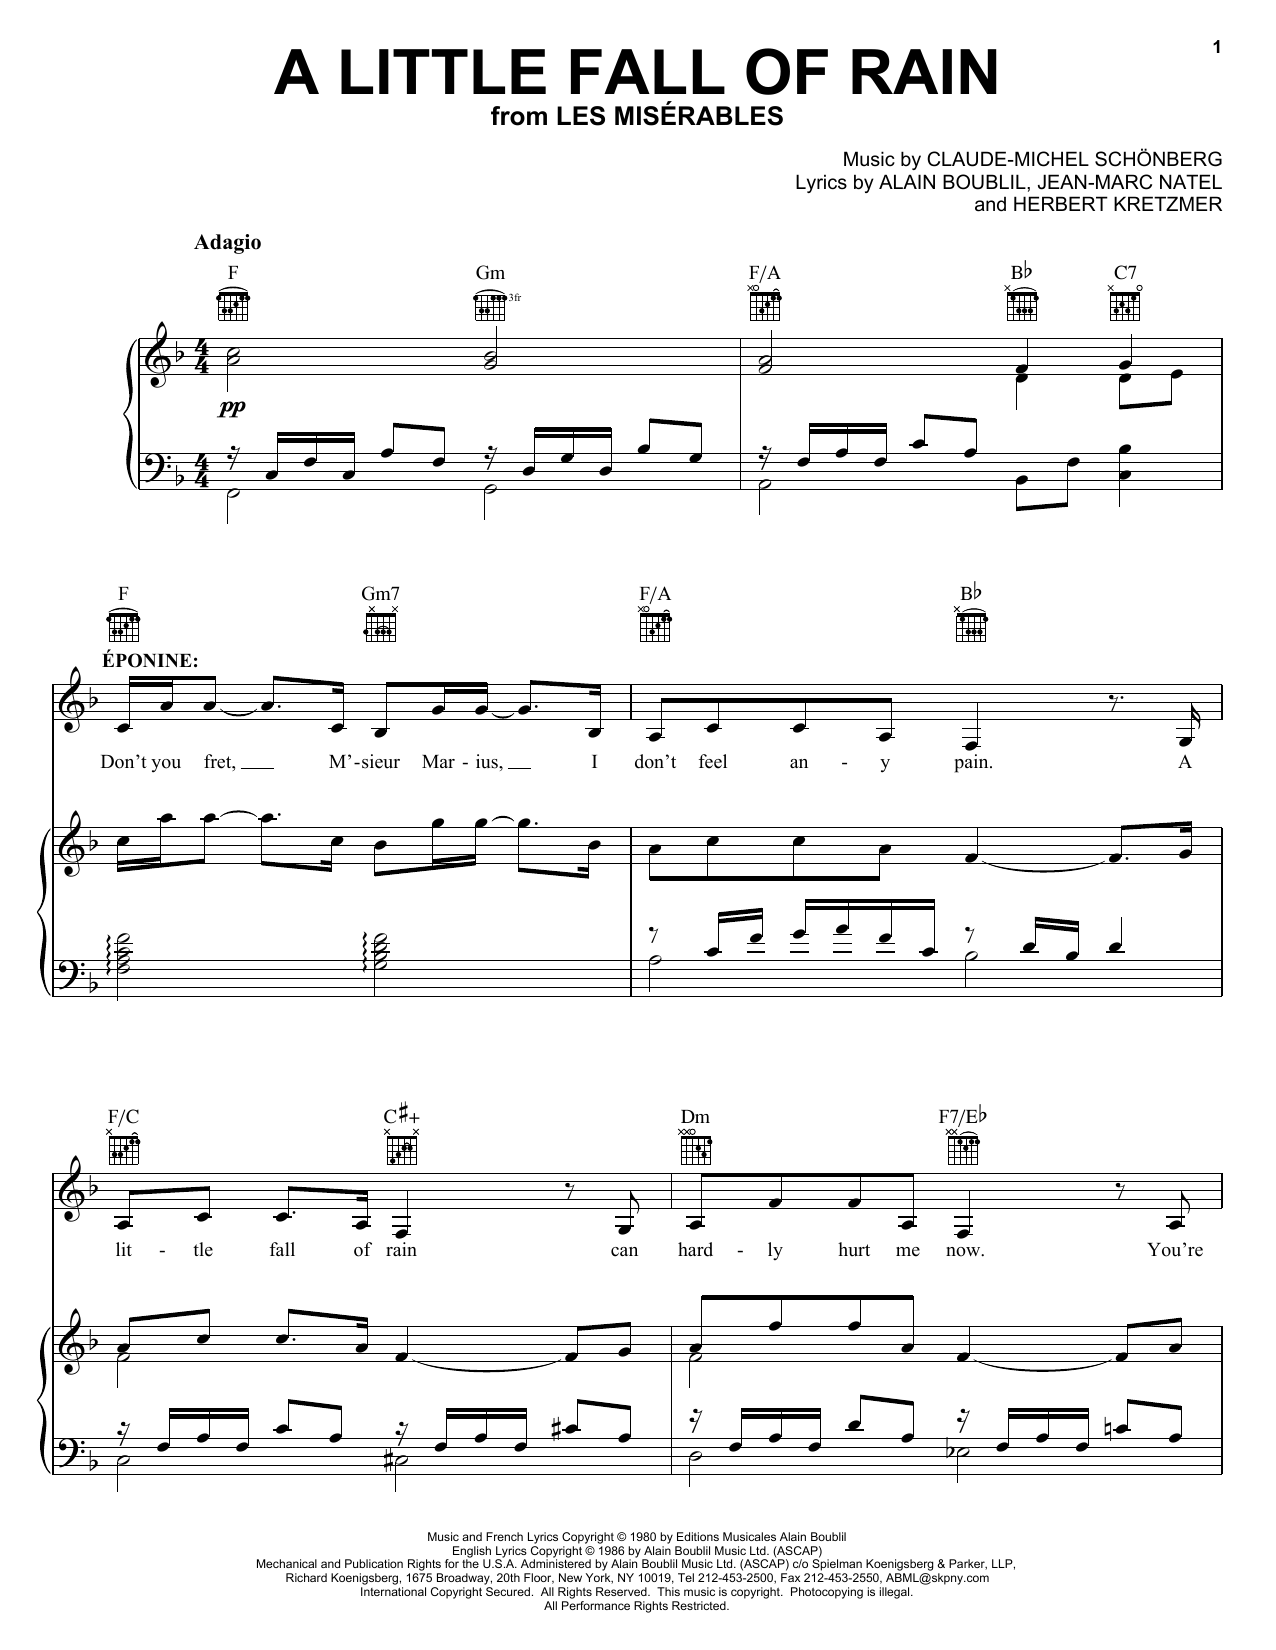 Boublil and Schonberg A Little Fall Of Rain (from Les Miserables) sheet music preview music notes and score for Piano, Vocal & Guitar including 8 page(s)